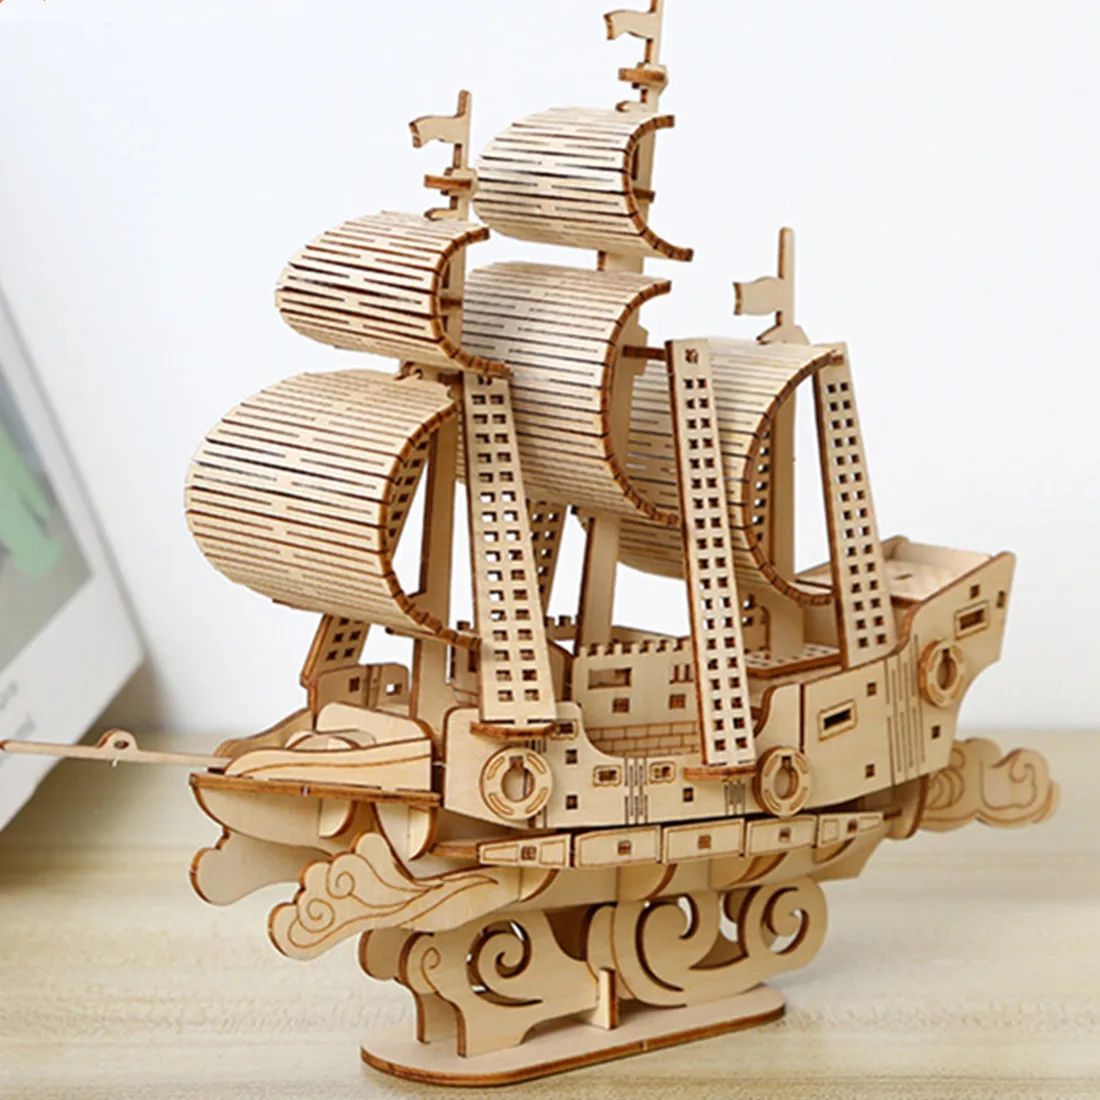 3D Puzzles Wooden Ocean Sailing Model Handmade Boat Building BlockS Kits DIY Assembly Ship Toy for Kids Adults GiftS decelerating steel gear assembly and 21t steel gear set are used in the ship model of 21 25 grade methanol engine